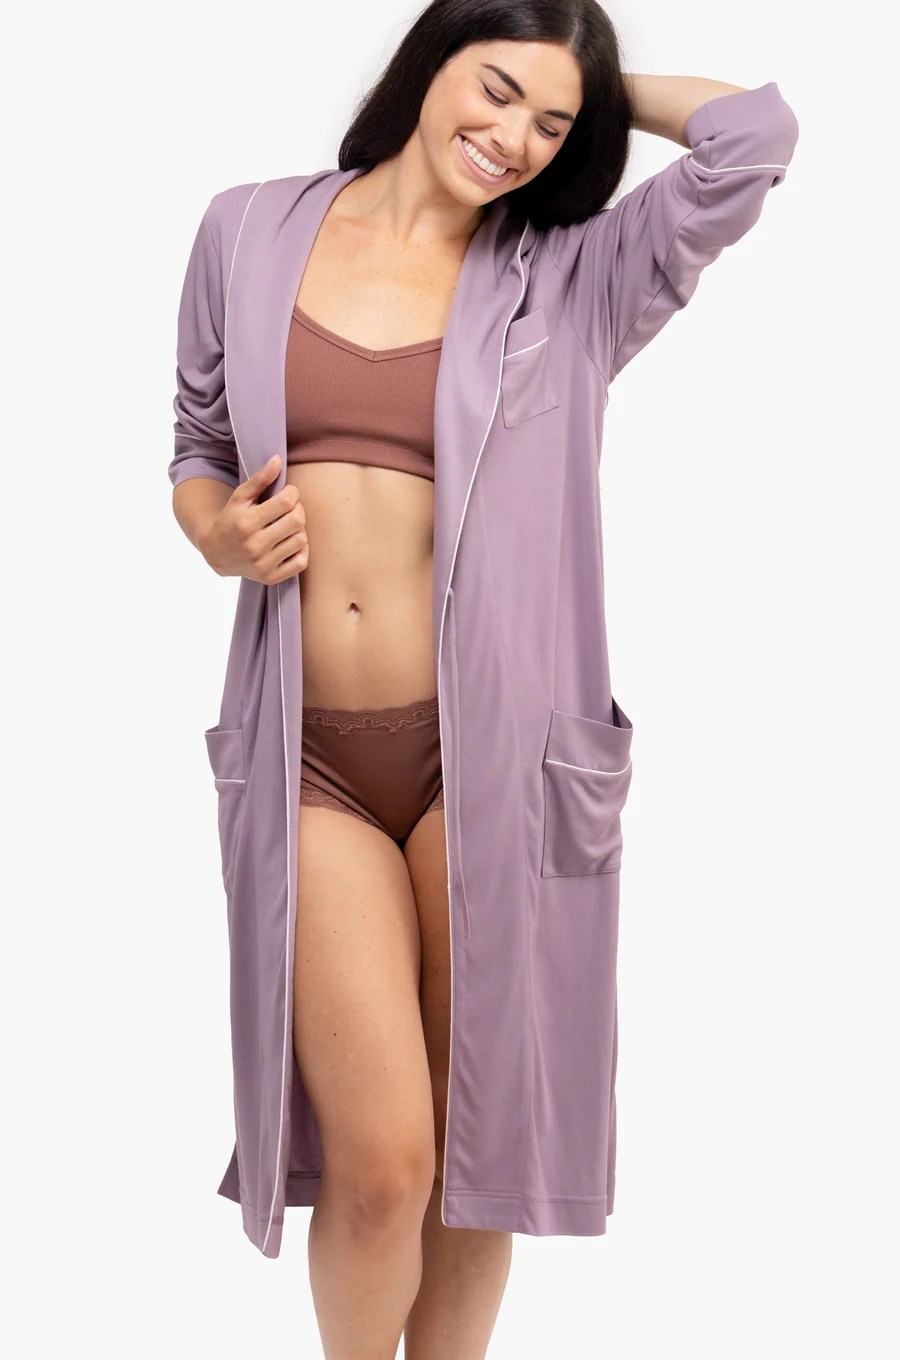 uwila warrior sustainable robe, from our valentine's day gift guide